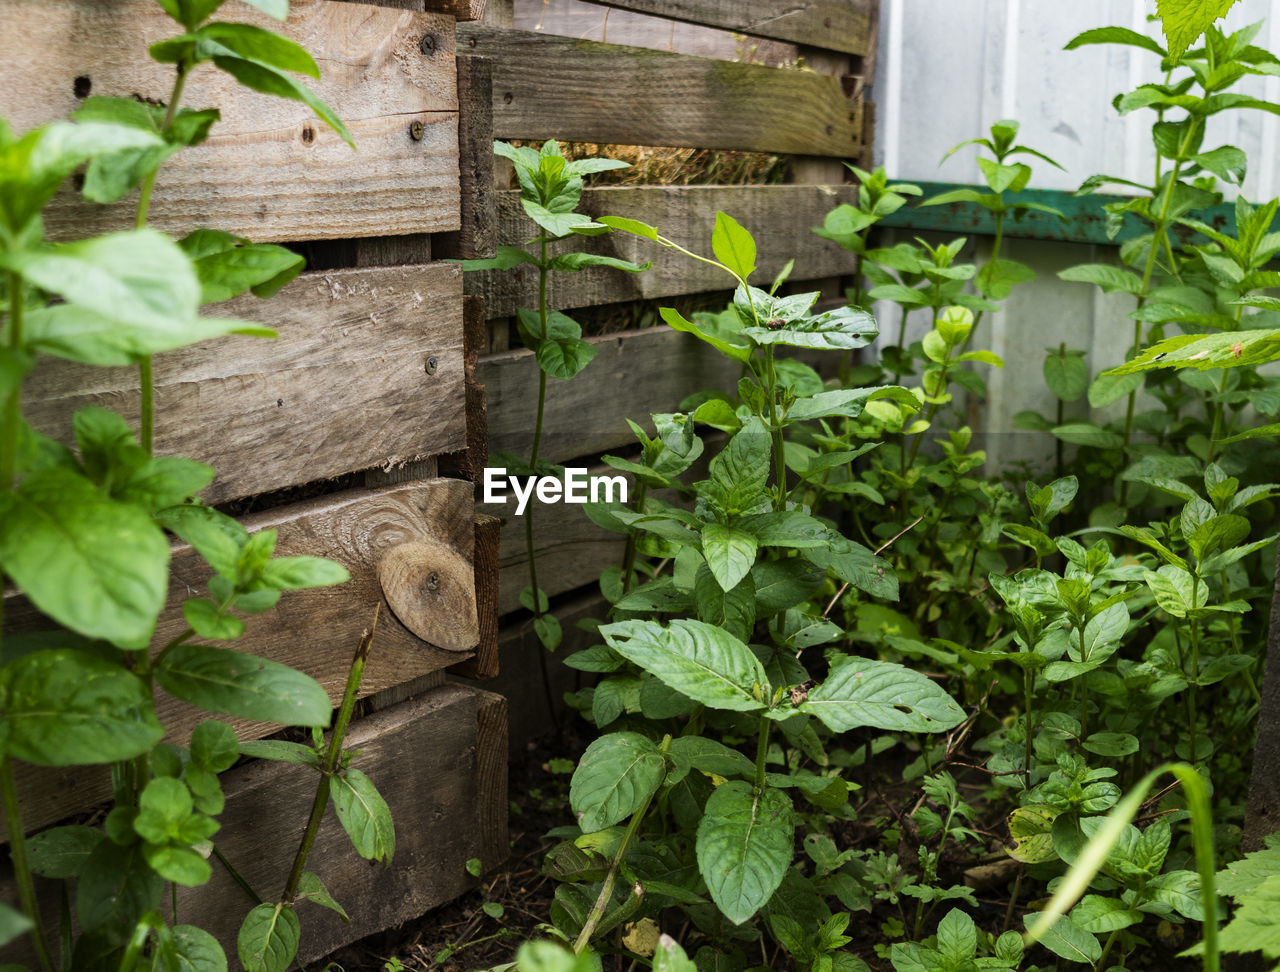  mint grows near compost bins made from used pallets.